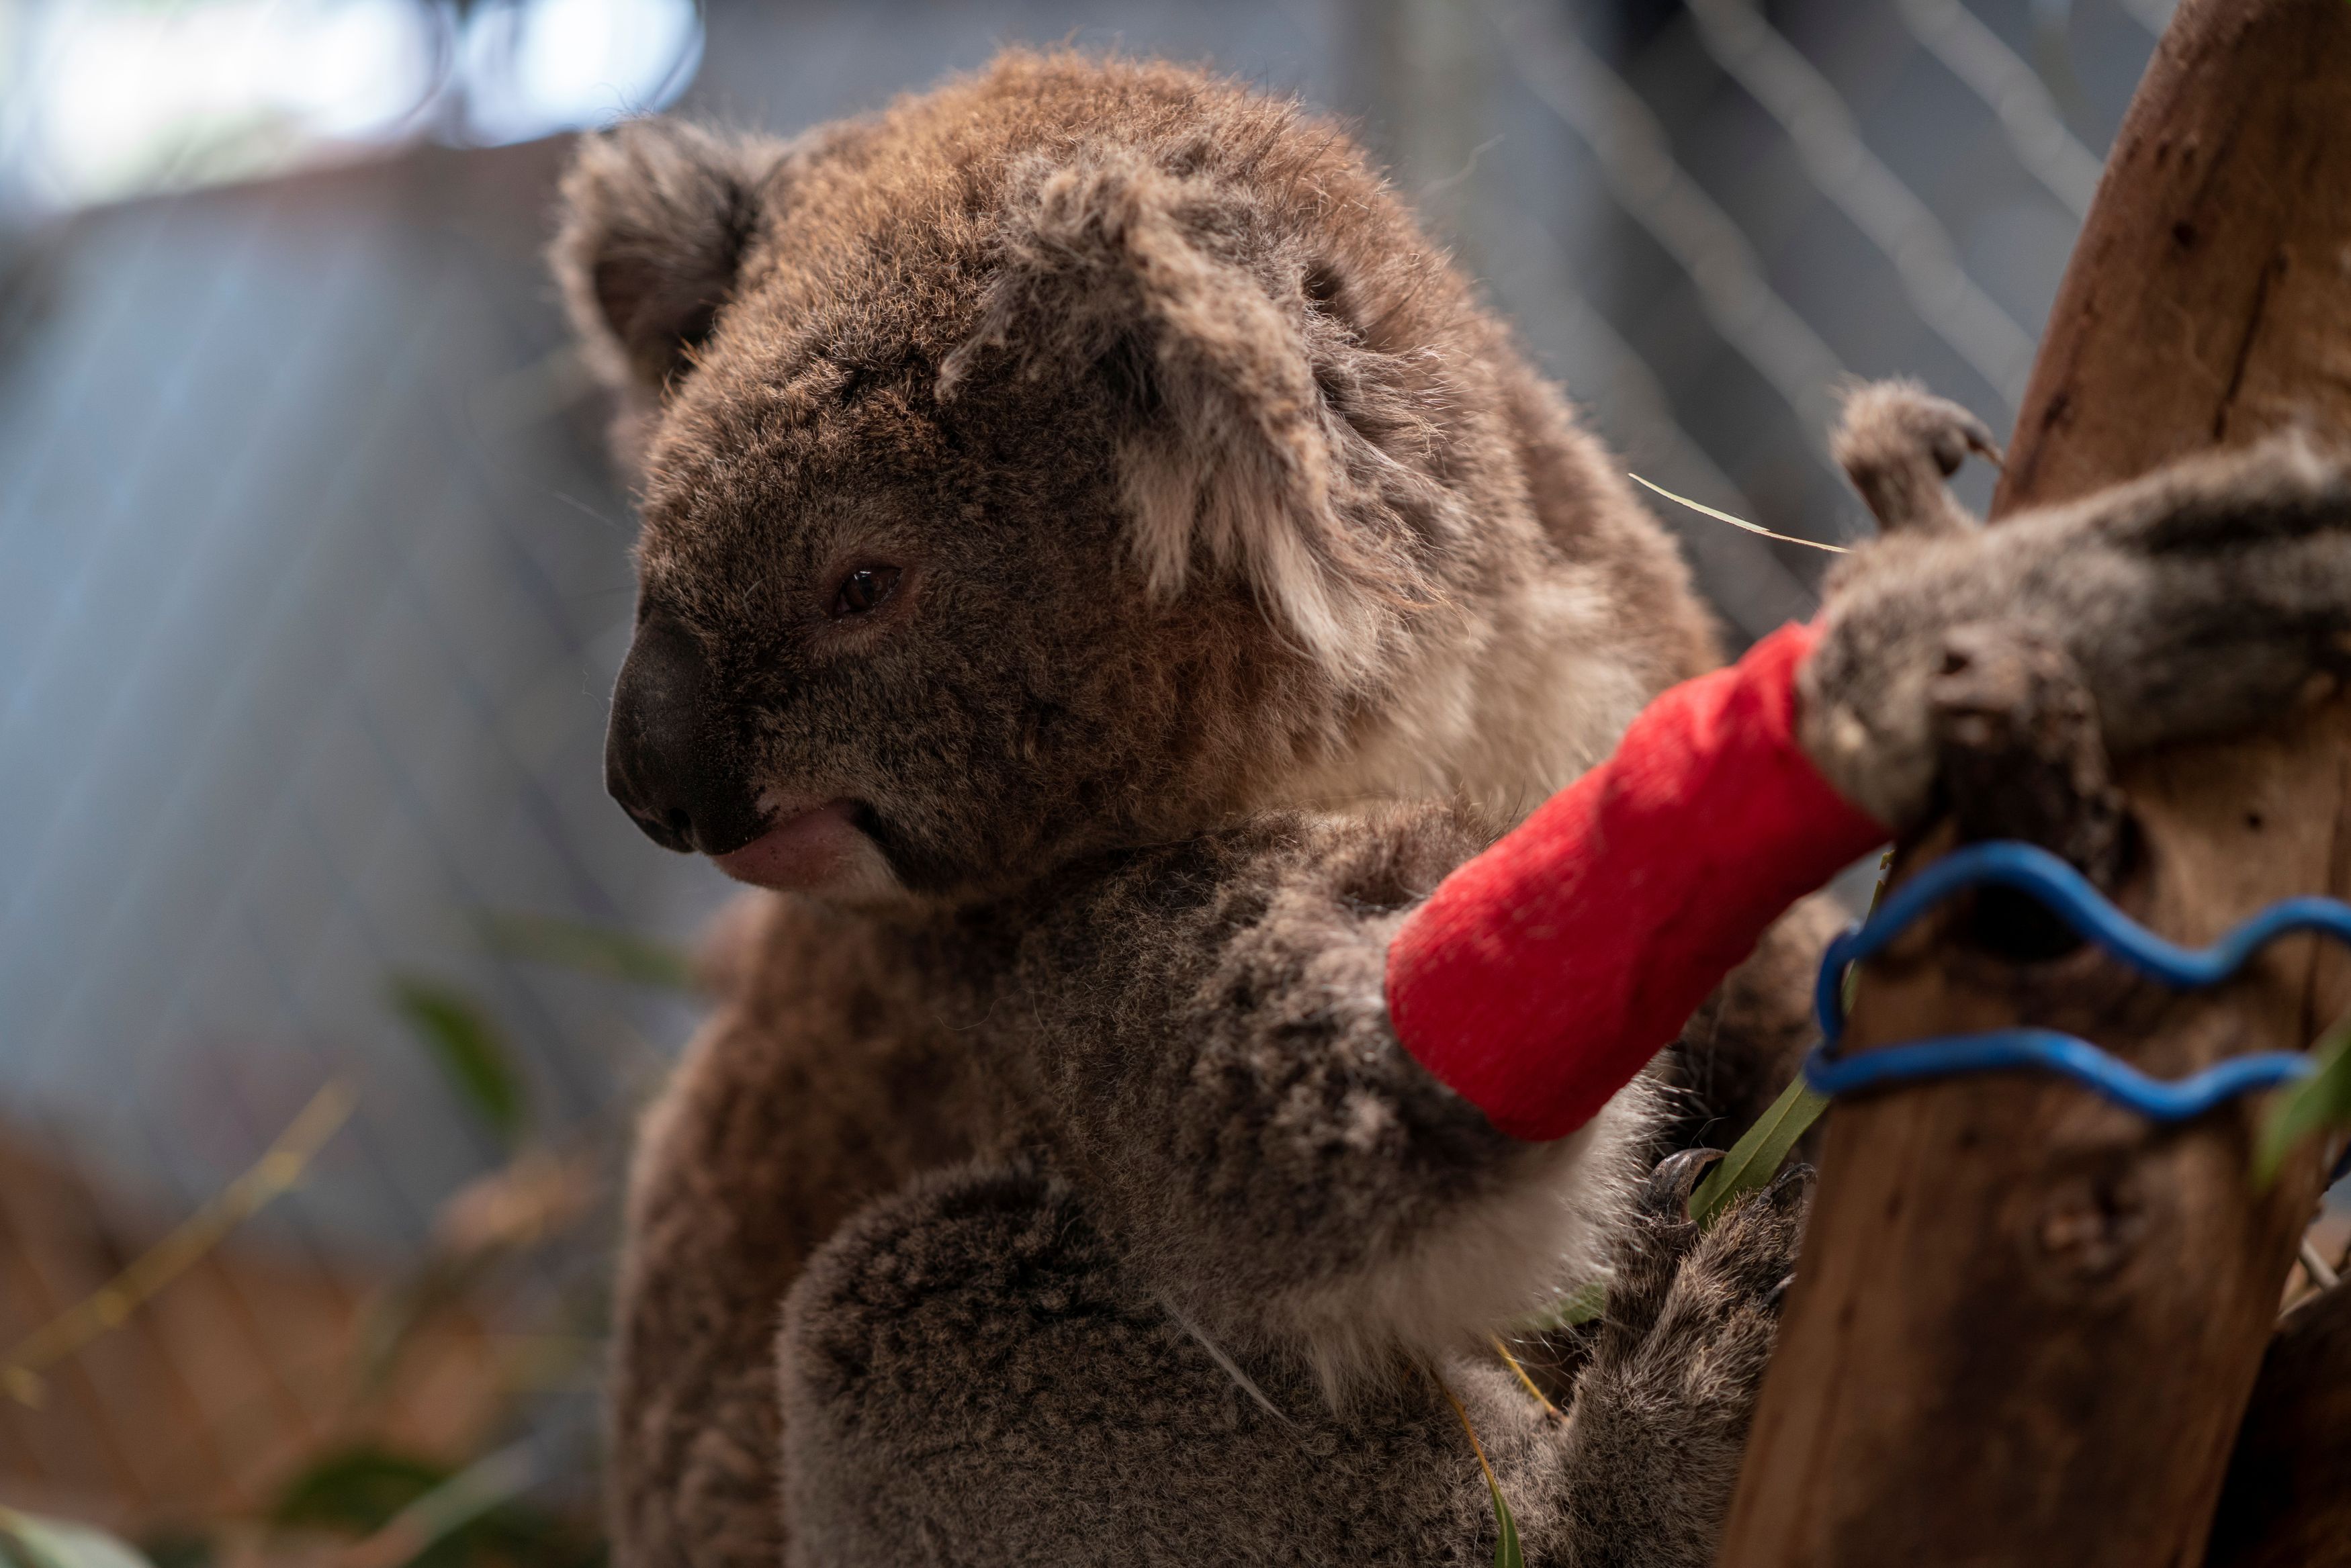 A koala displaced and injured by Australia’s bushfire crisis is seen at the campus of Australian National University (ANU), where researchers are taking care of 11 injured koalas from the various fire grounds in the region, in Canberra, Australia, January 29, 2020. Picture taken January 29, 2020. AUSTRALIAN NATIONAL UNIVERSITY/Handout via REUTERS  THIS IMAGE HAS BEEN SUPPLIED BY A THIRD PARTY. MANDATORY CREDIT. NO RESALES. NO ARCHIVES.